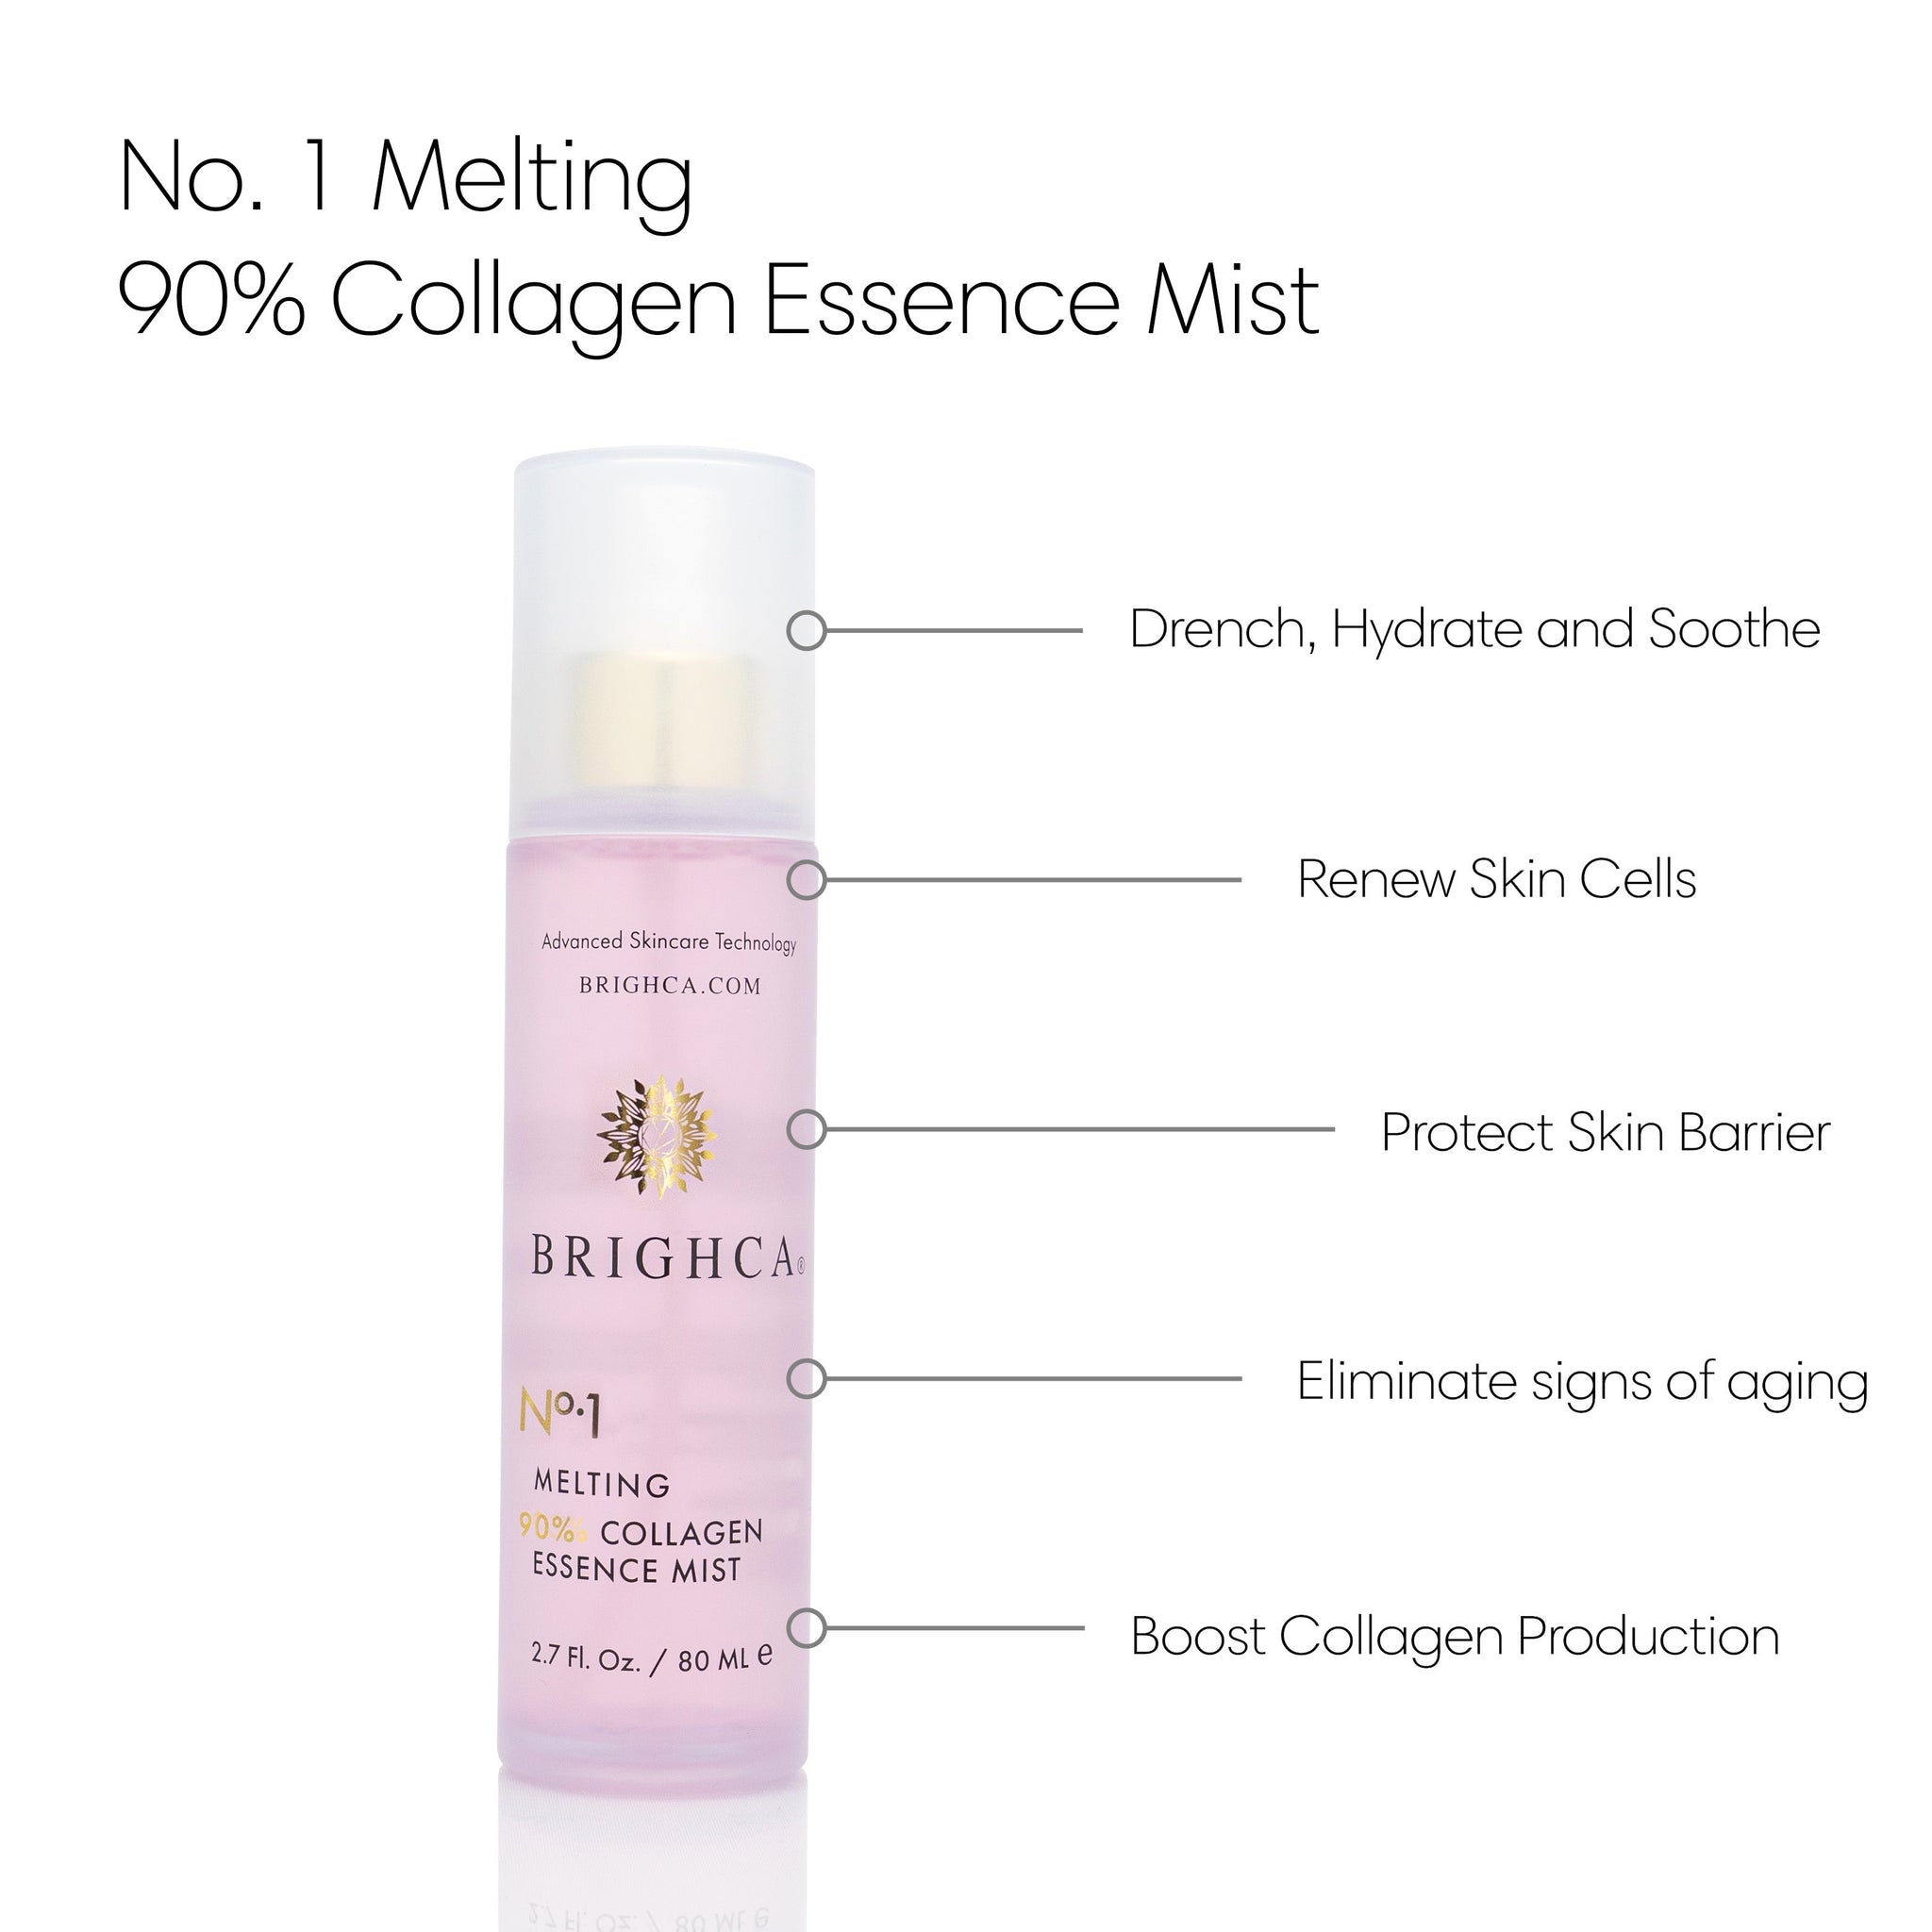 Brighca Melting 90% collagen essence mist to hydrate, soothe, renew skin cells protect skin barrier, eliminate signs of aging and boost collagen production